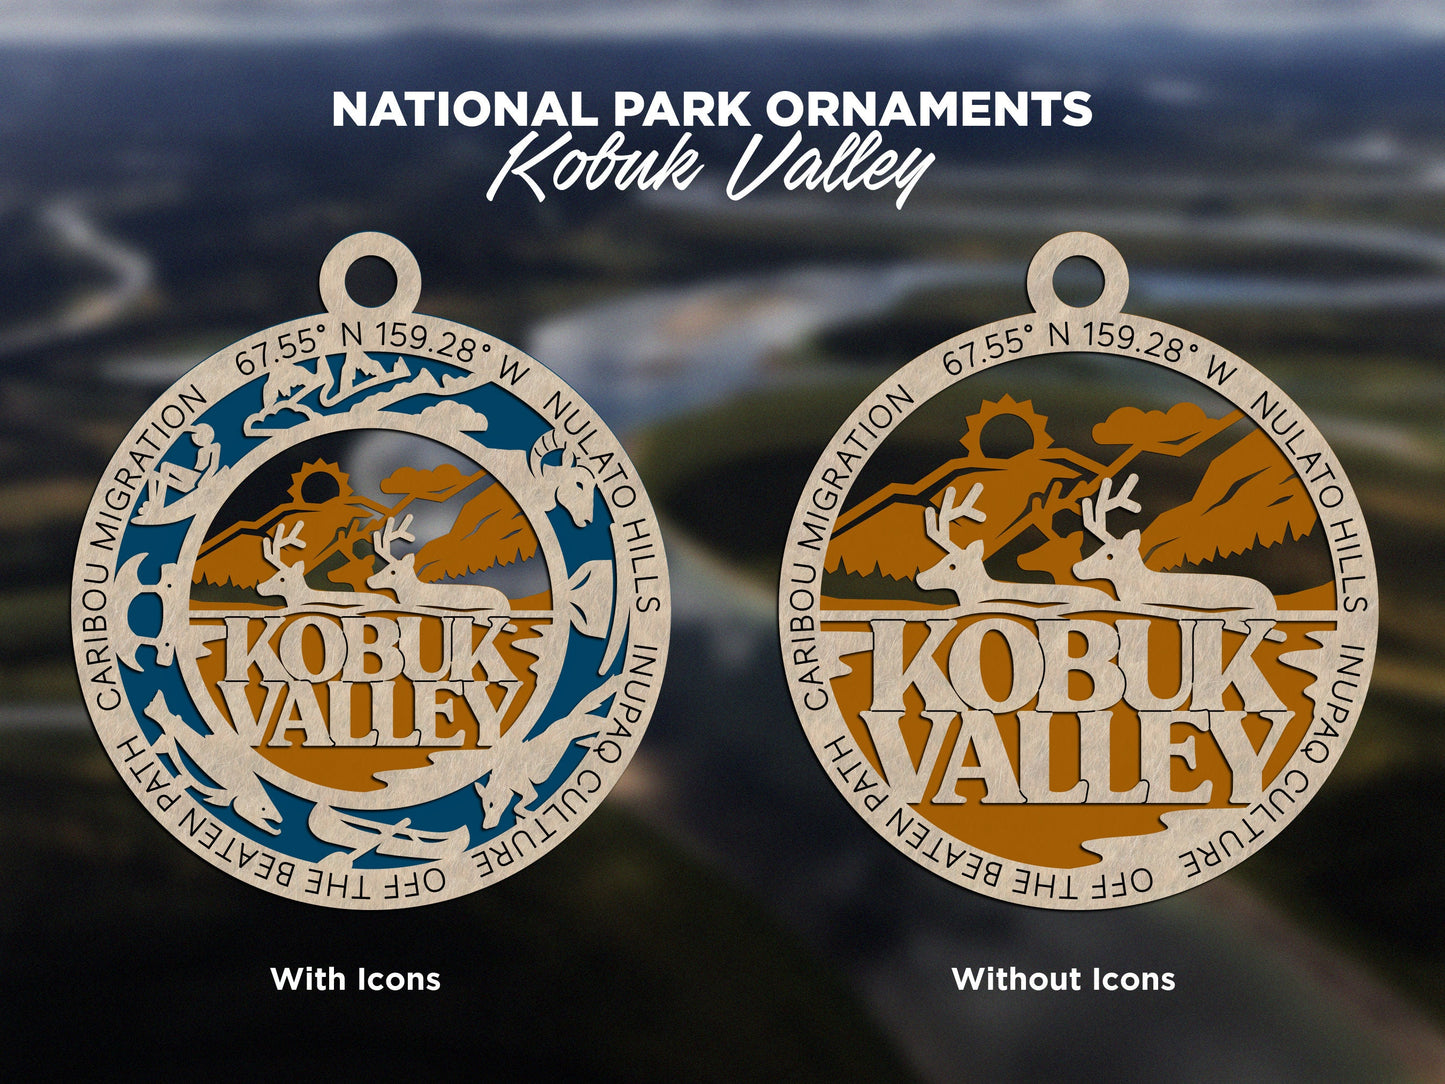 Kubuk Valley Park Ornament - Includes 2 Ornaments - Laser Design SVG, PDF, AI File Download - Tested On Glowforge and LightBurn